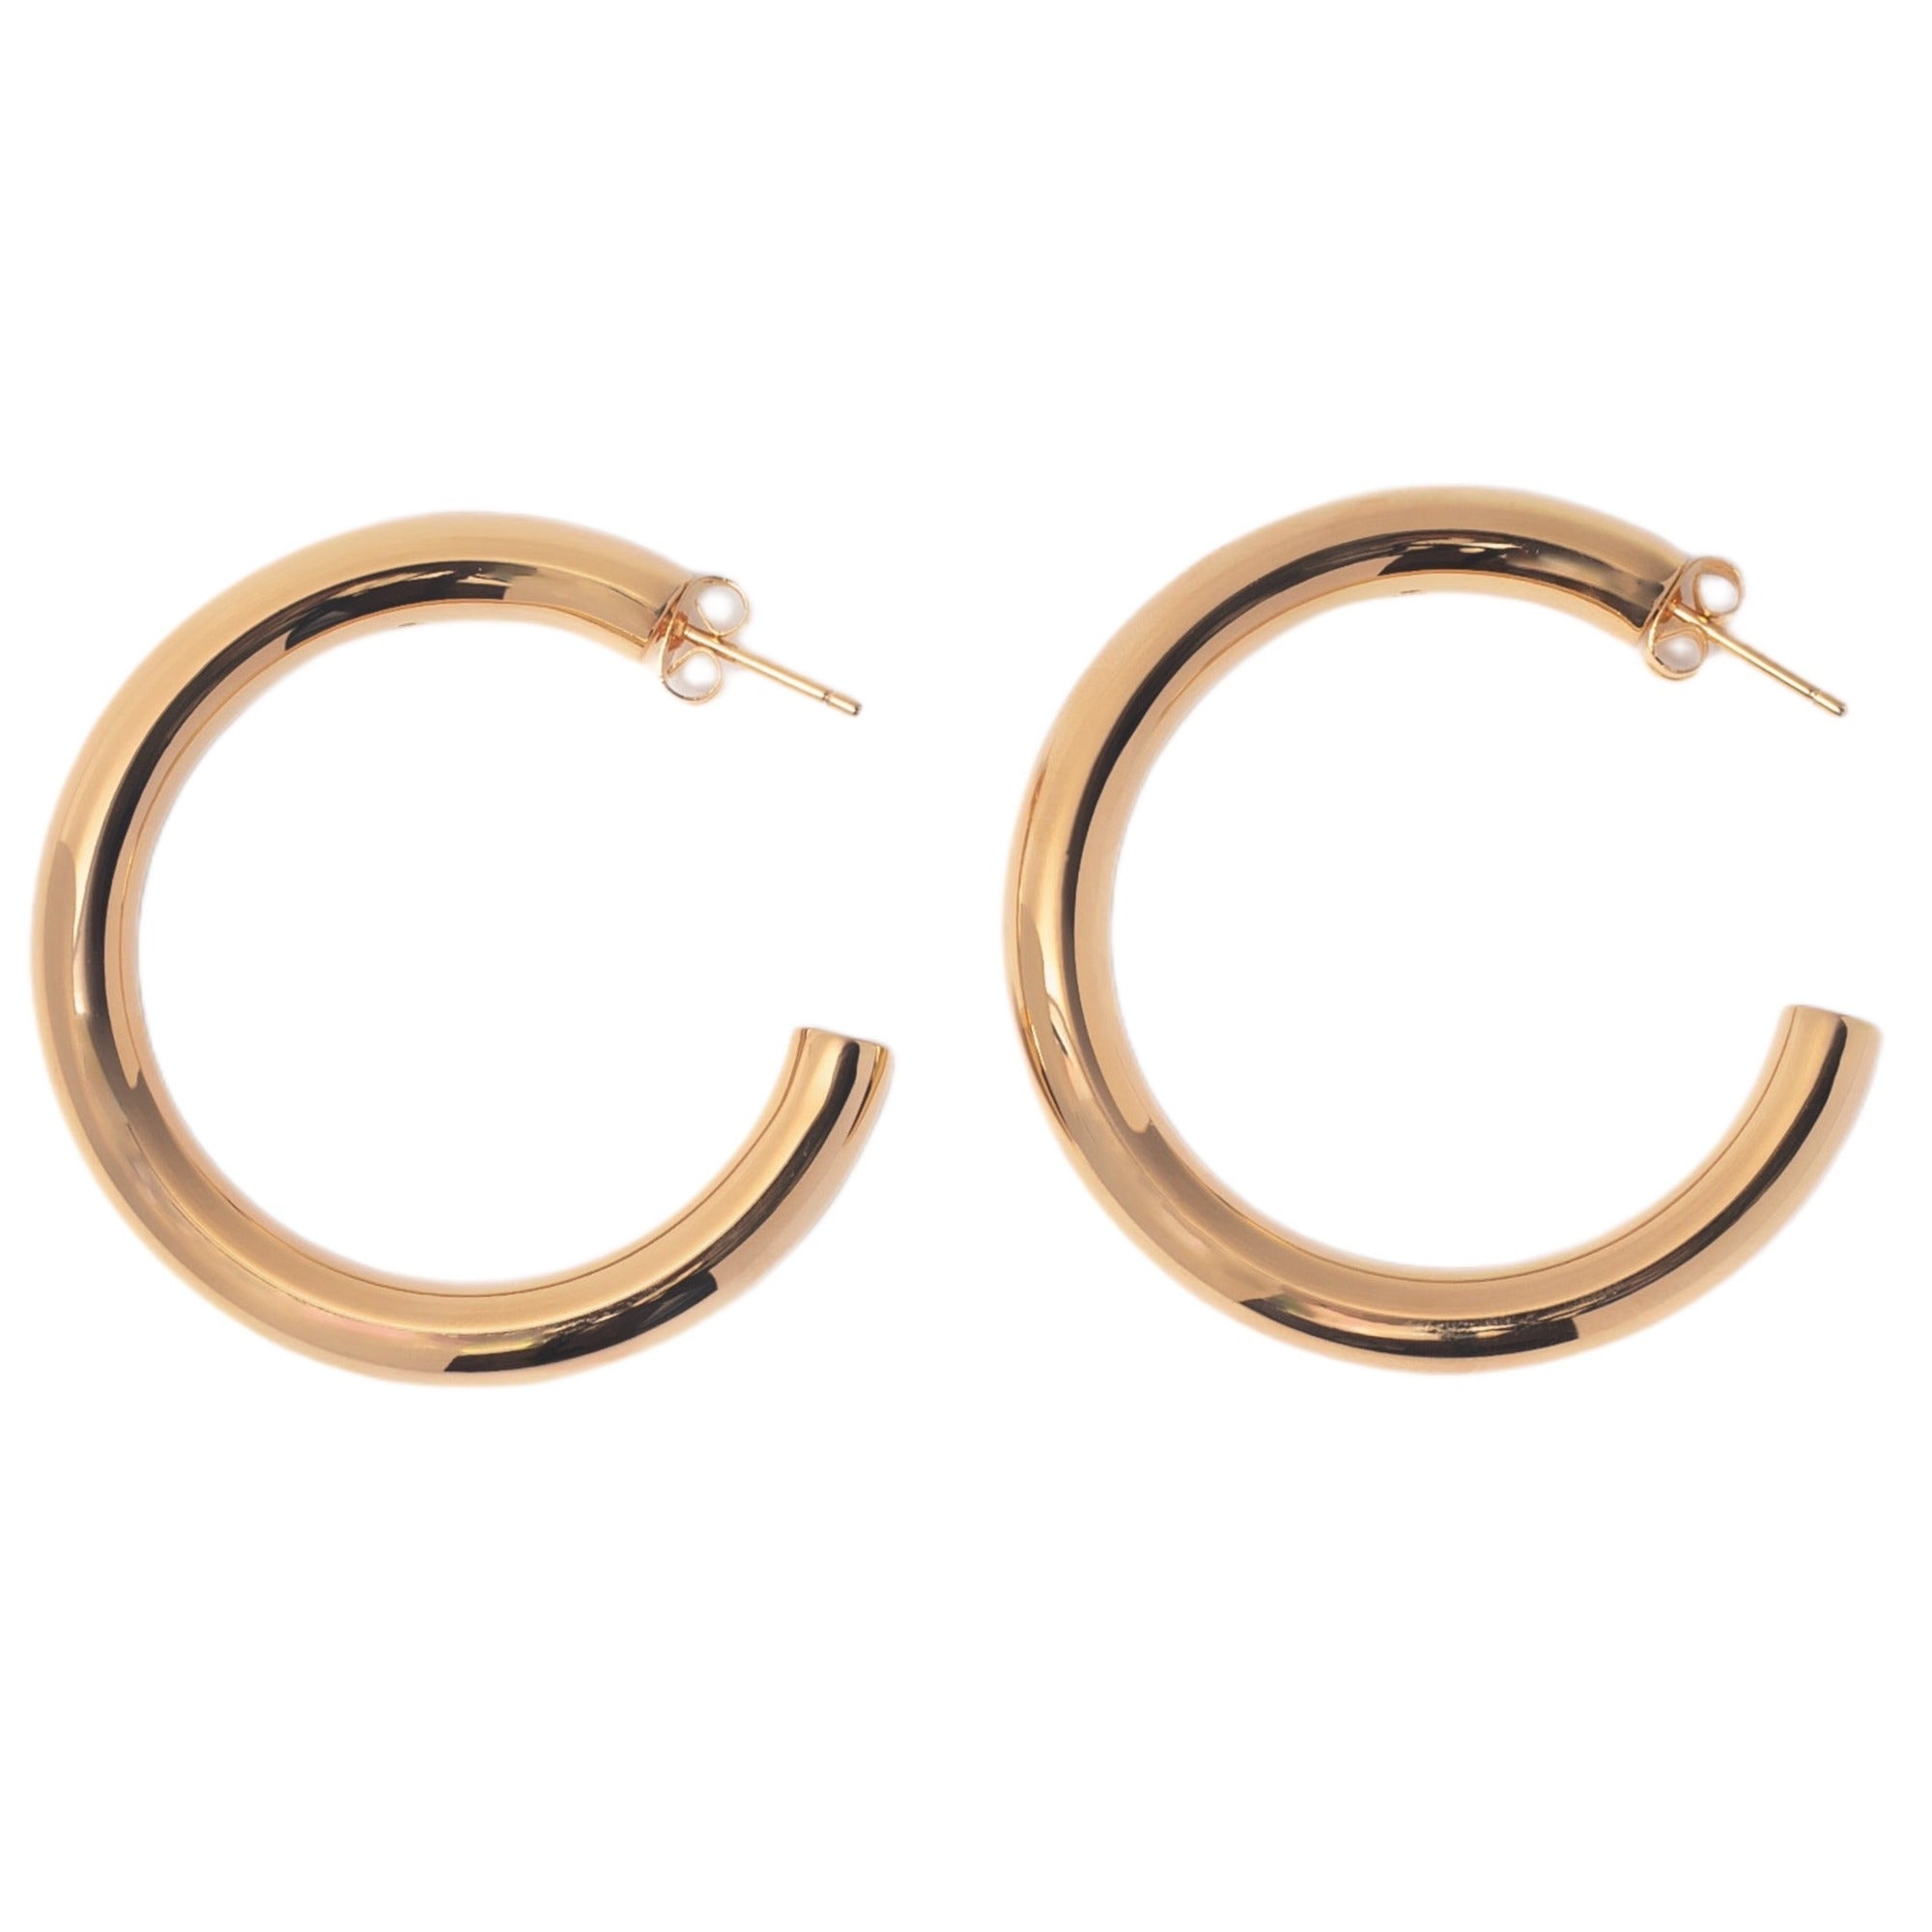 Extra Golden Hoops - Grande from Erin Fader Jewelry